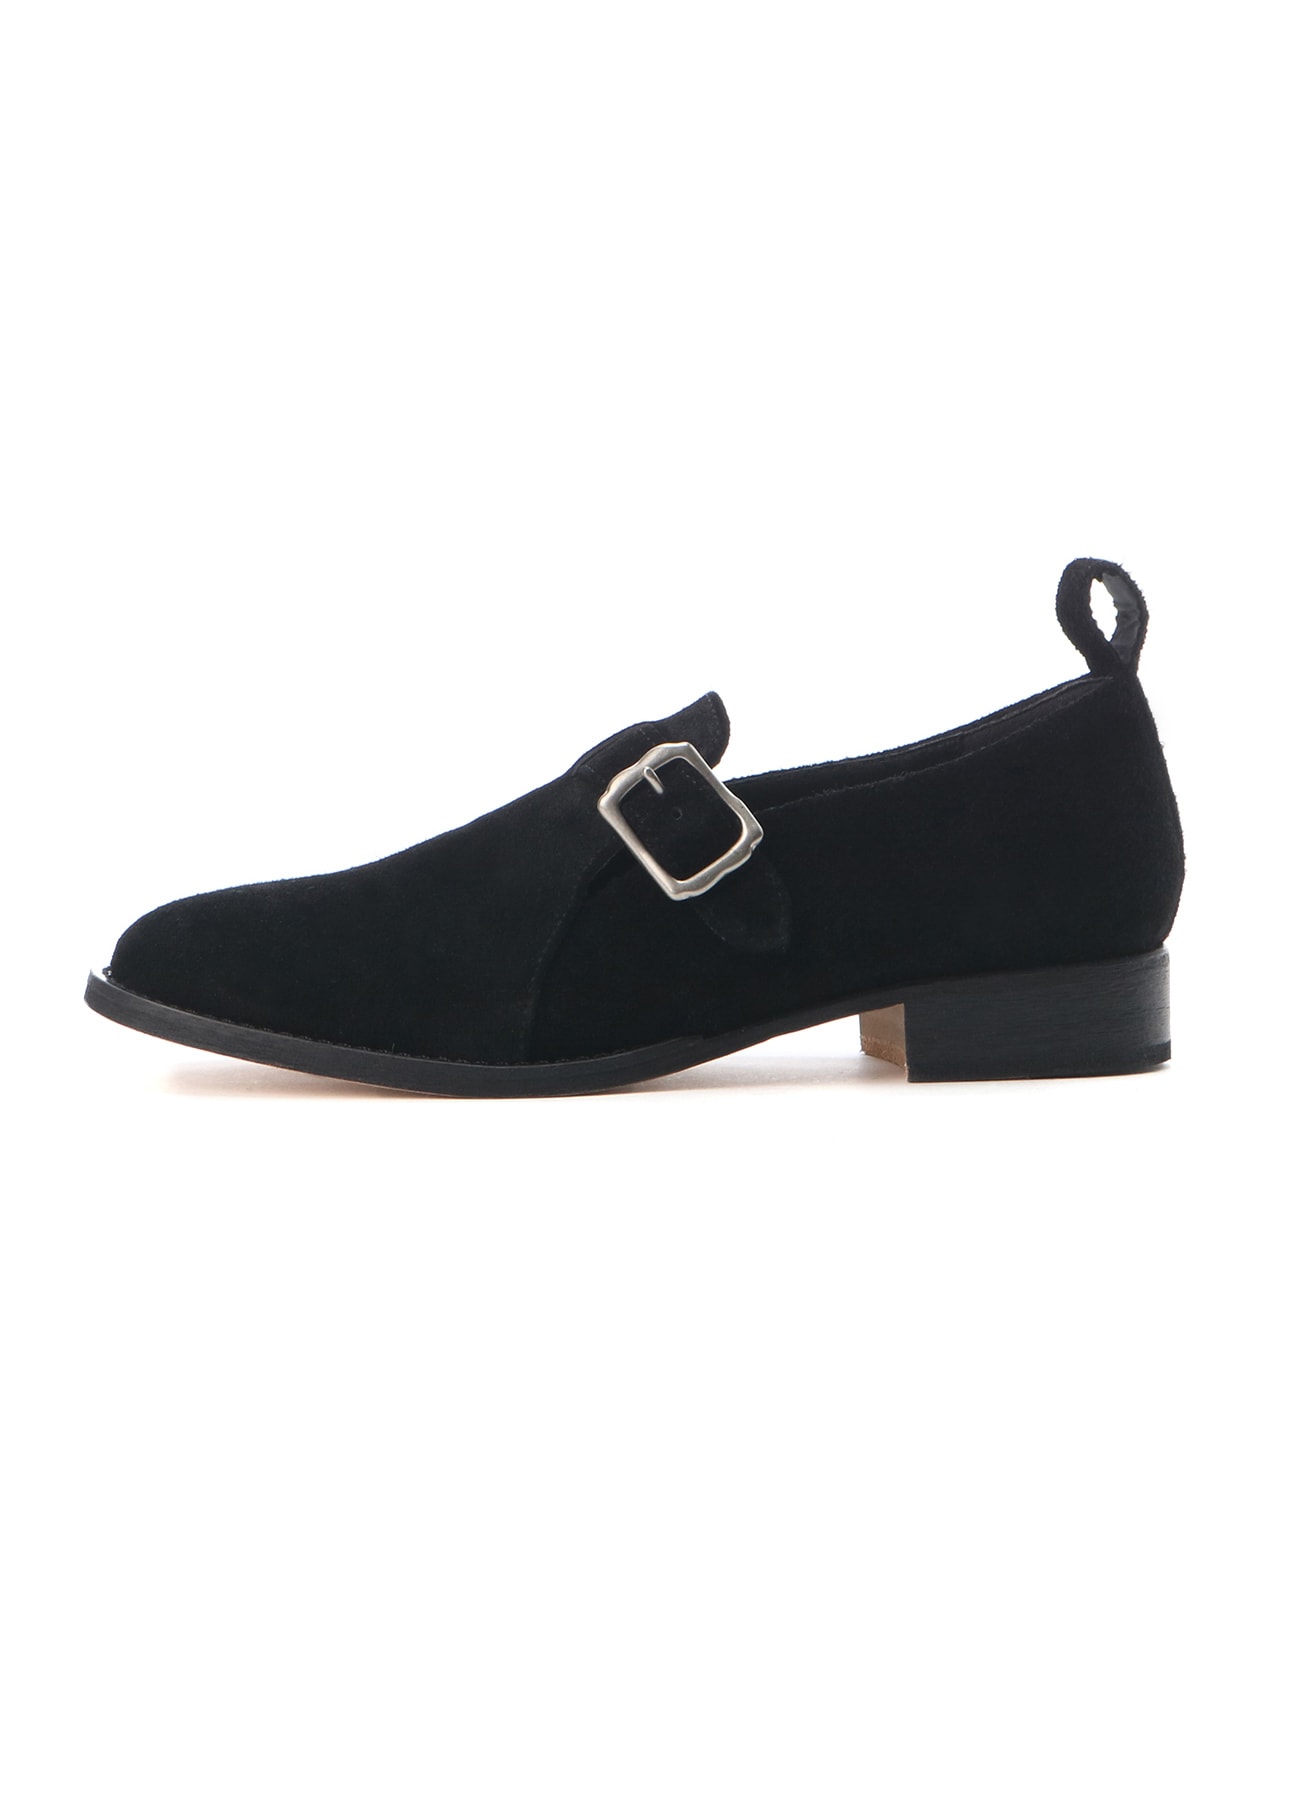 COW SUEDE ONE STRAP SHOES